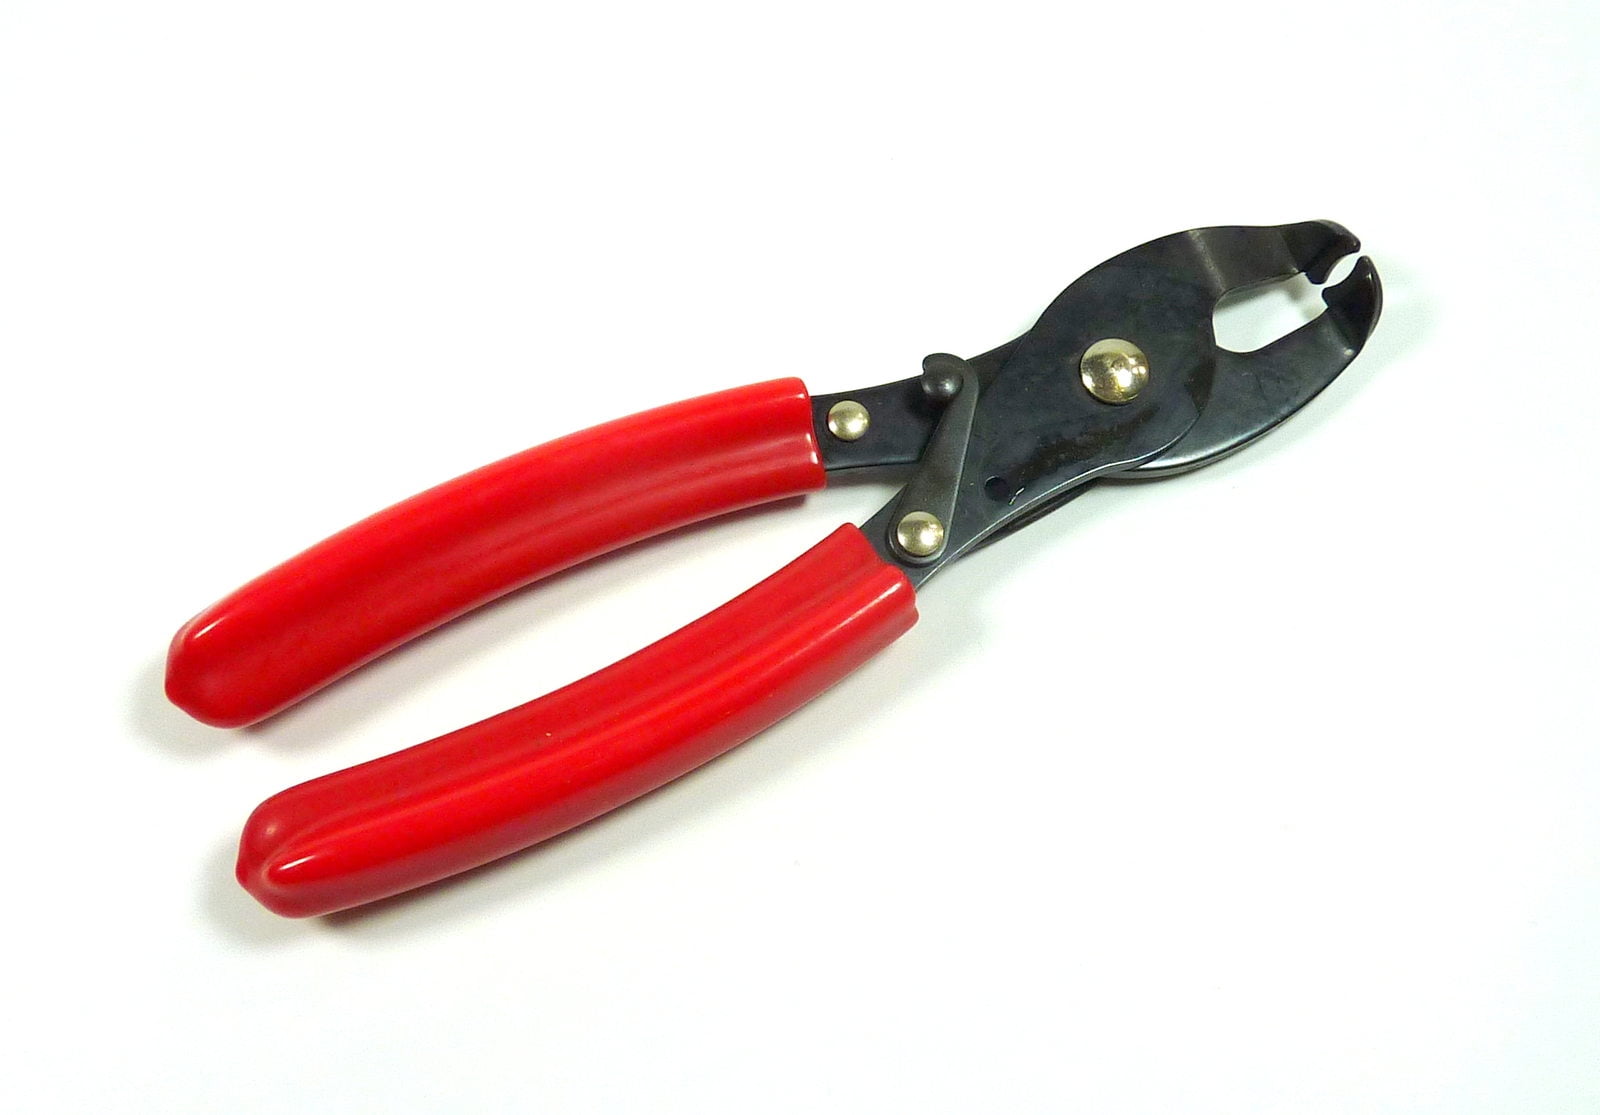 Philmore Nylon Strain Relief Bushing Removal Crimp Tool Pliers for sale online 